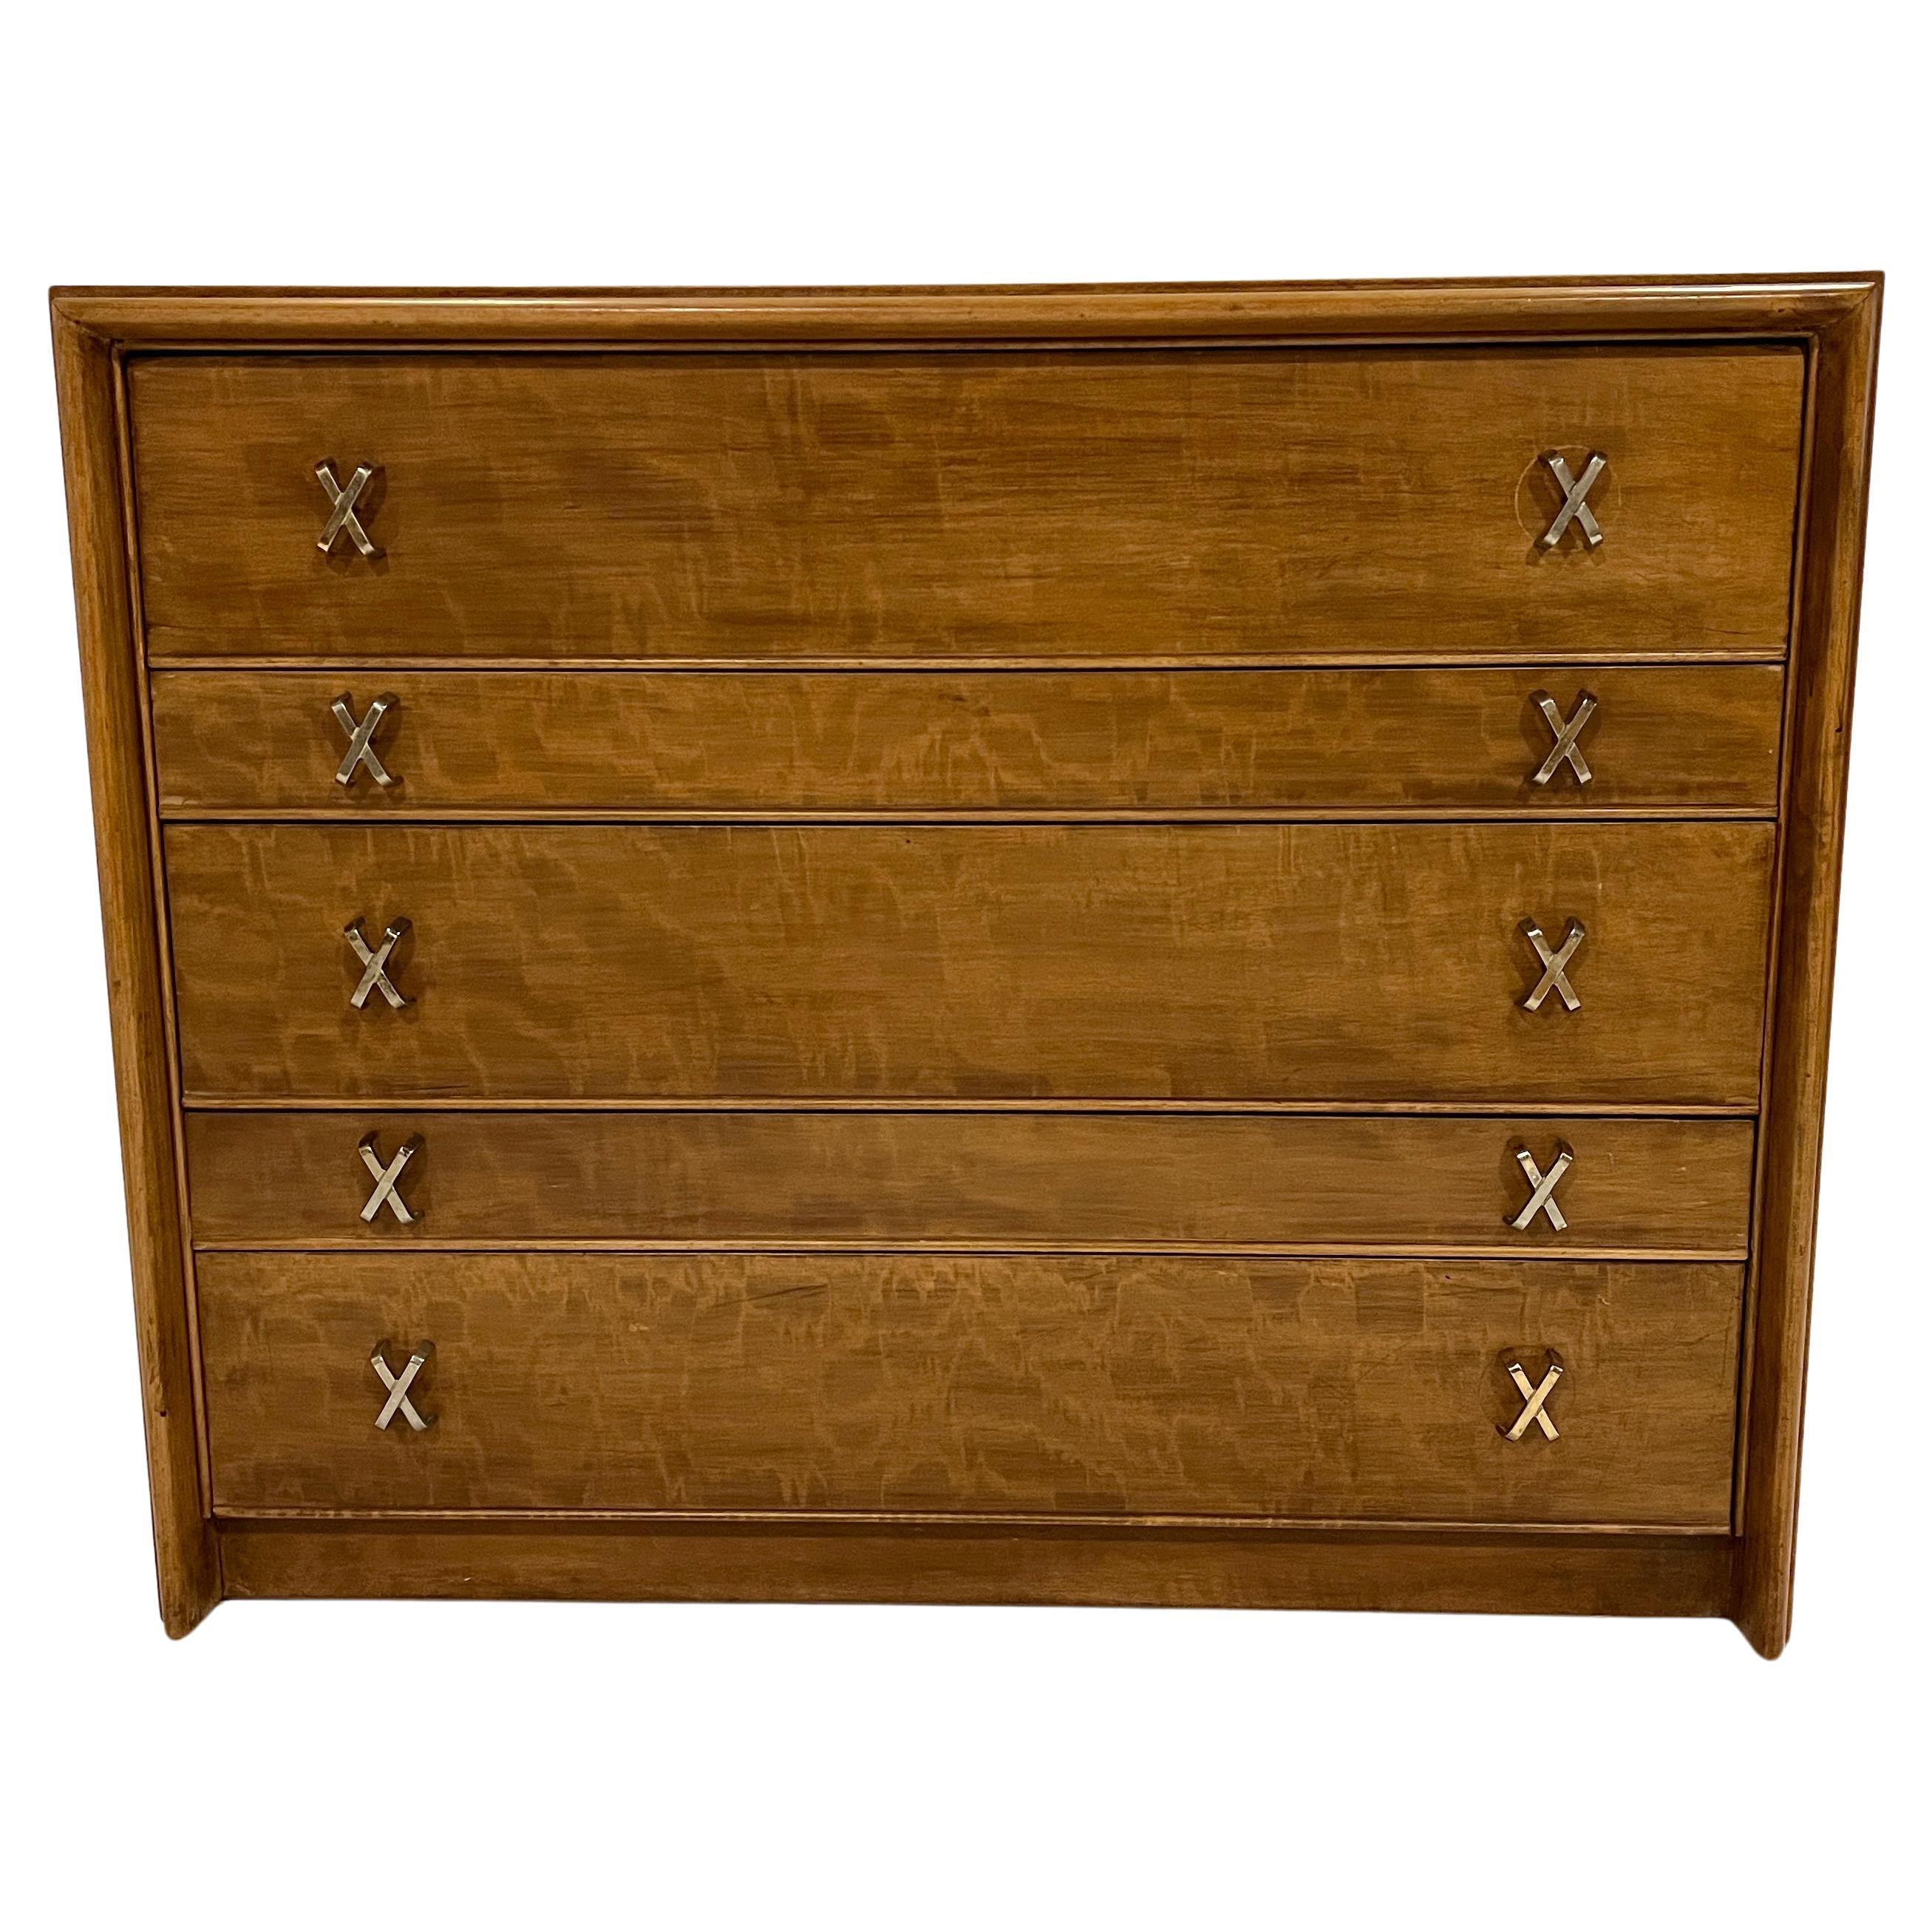  Johnson Furniture Company Commodes and Chests of Drawers